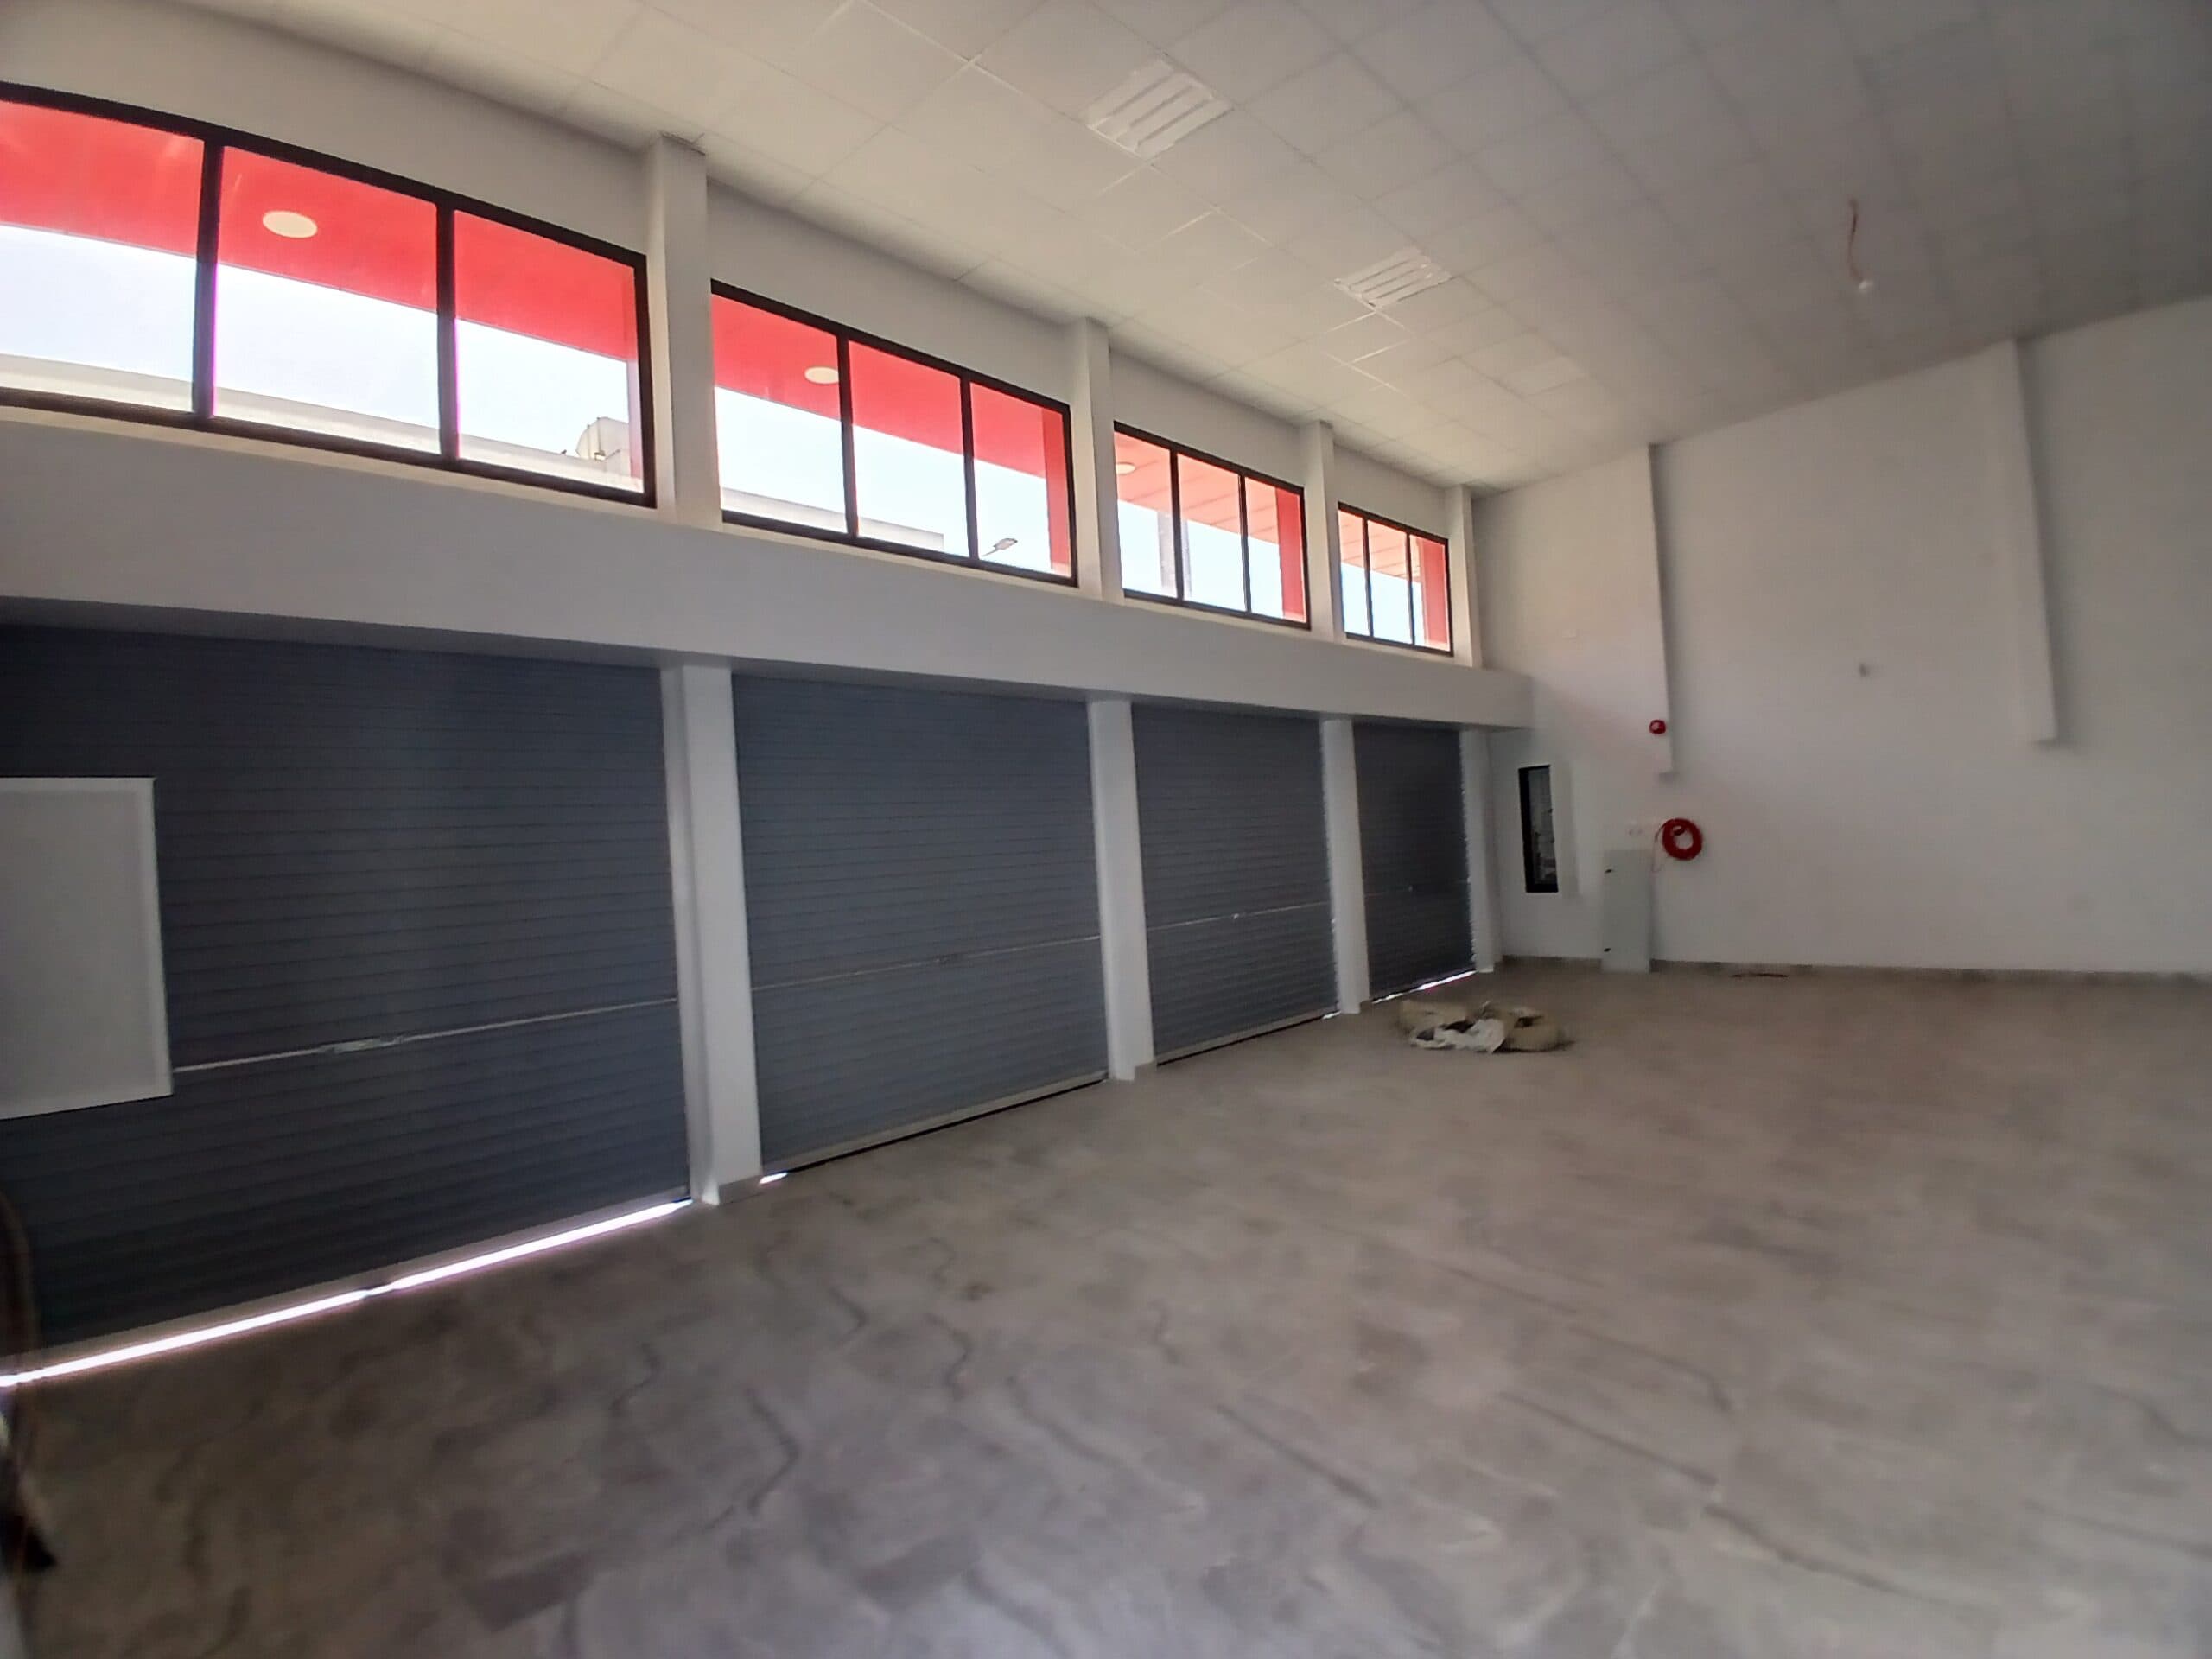 Interior of an empty industrial warehouse with grey flooring and several closed metallic roller shutter doors under a row of high windows with auto draft tint.